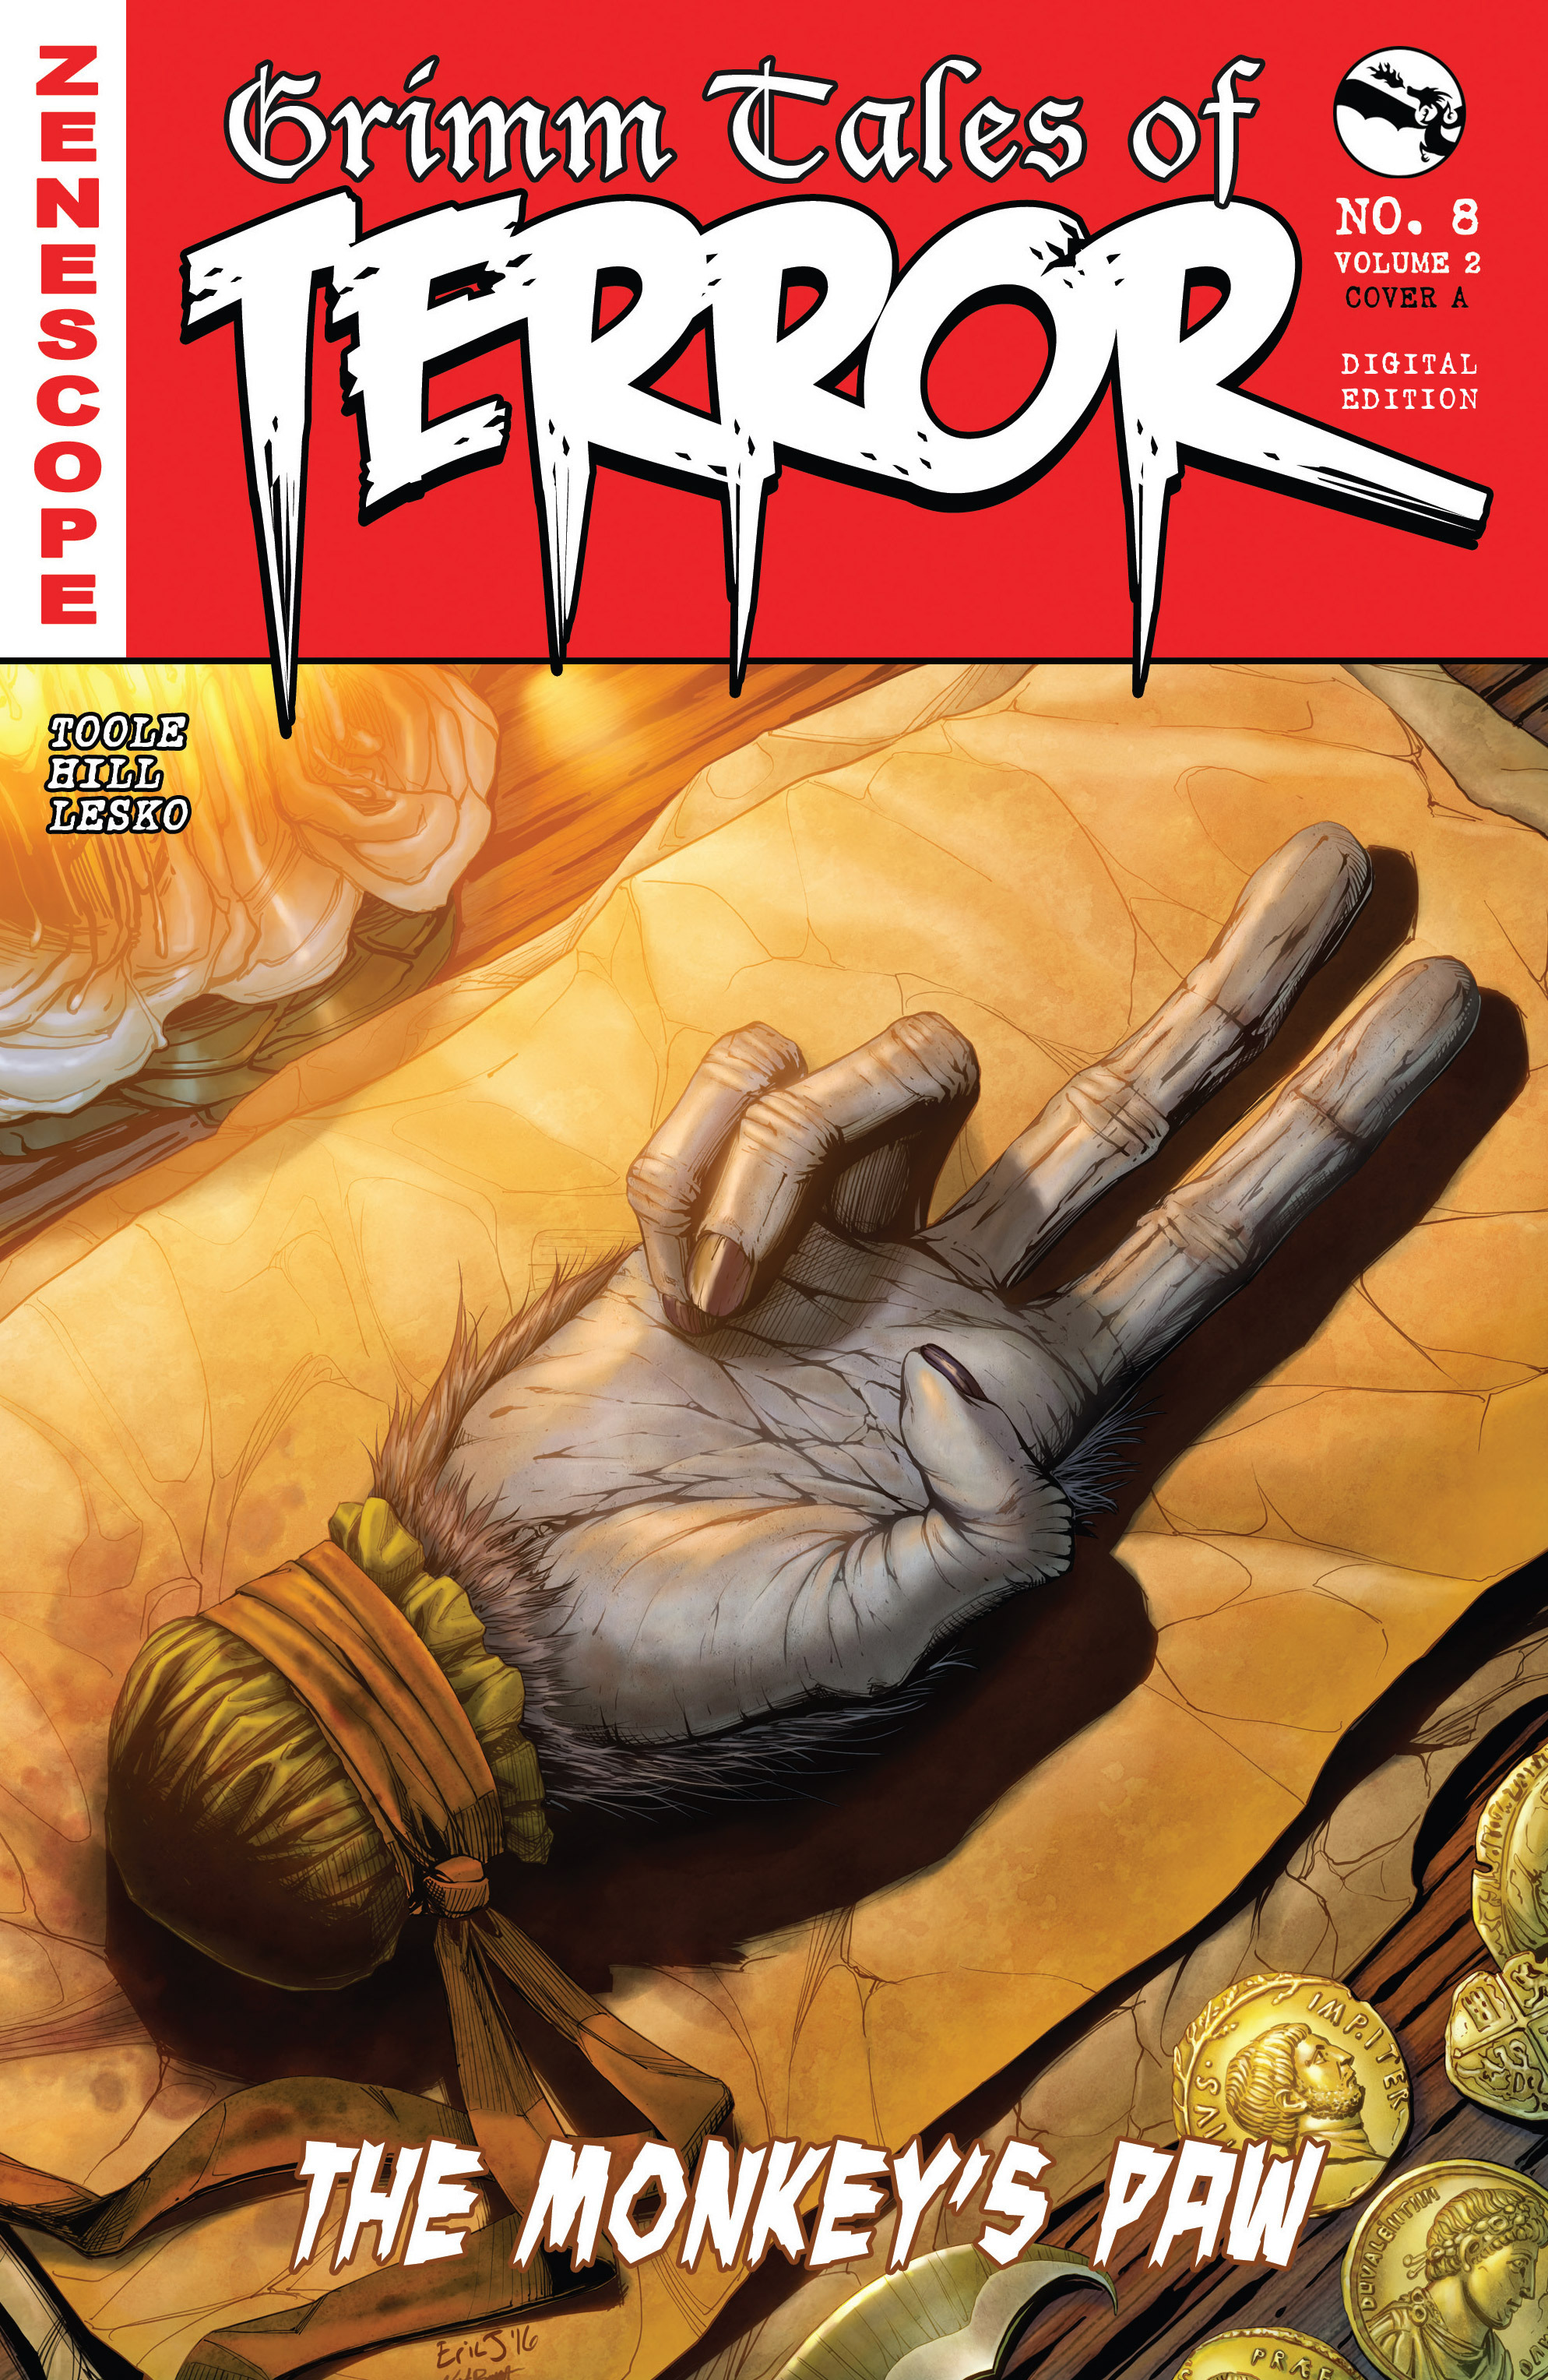 Read online Grimm Tales of Terror (2015) comic -  Issue #8 - 1